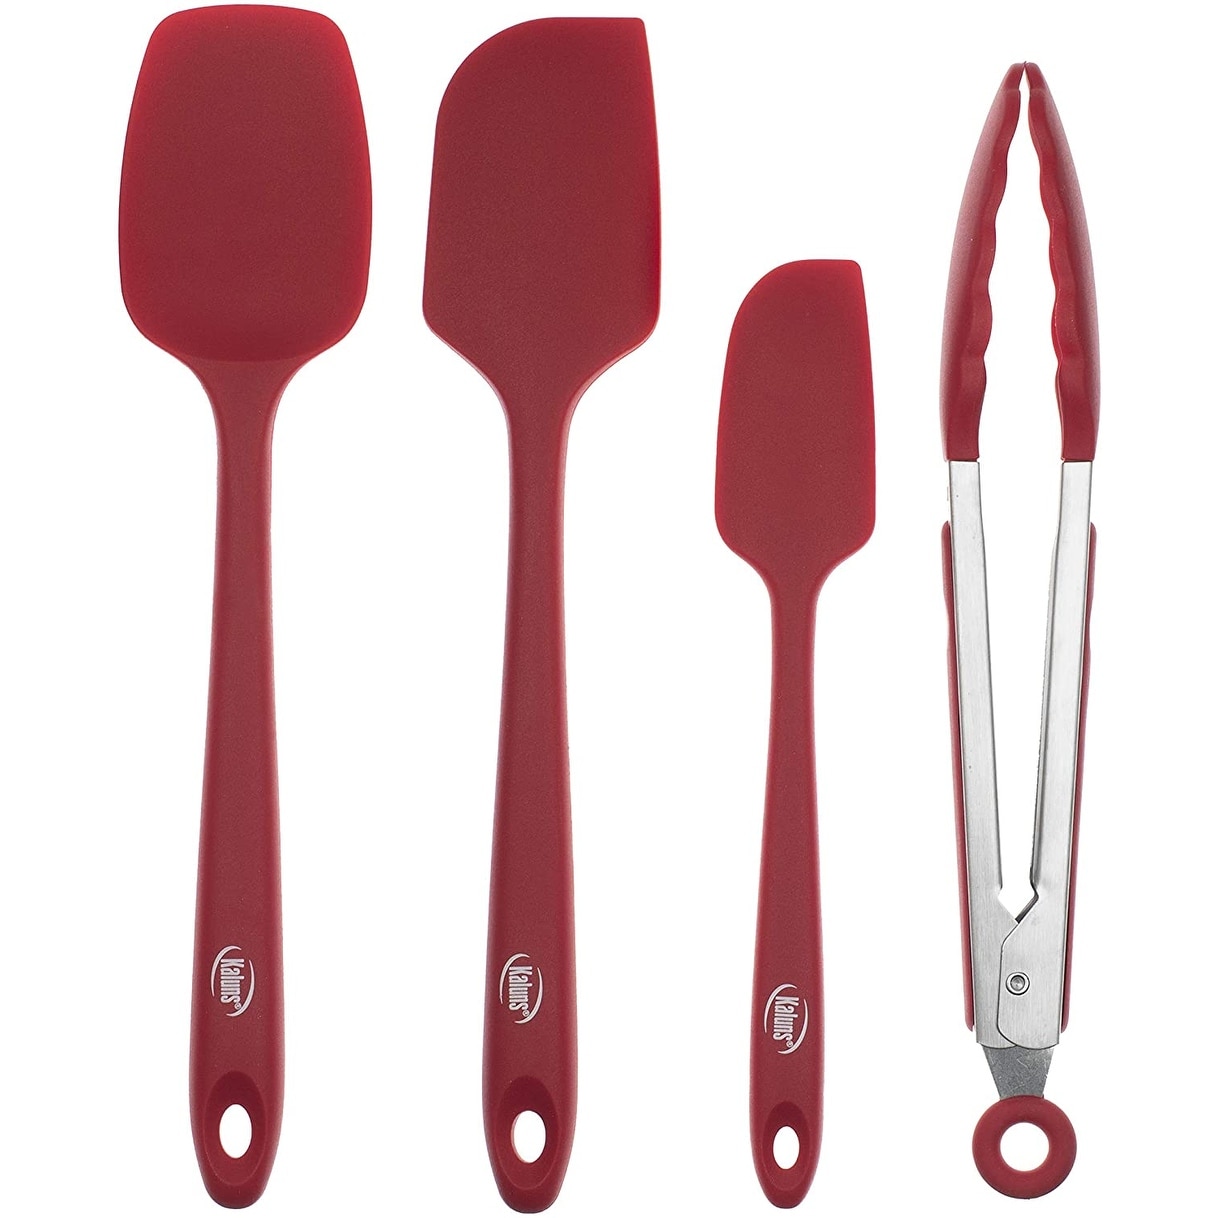 10 pcs set Silicone Heat Resistant Kitchen Cooking Utensils spatula  Non-Stick Baking Tool tongs ladle gadget (red) 